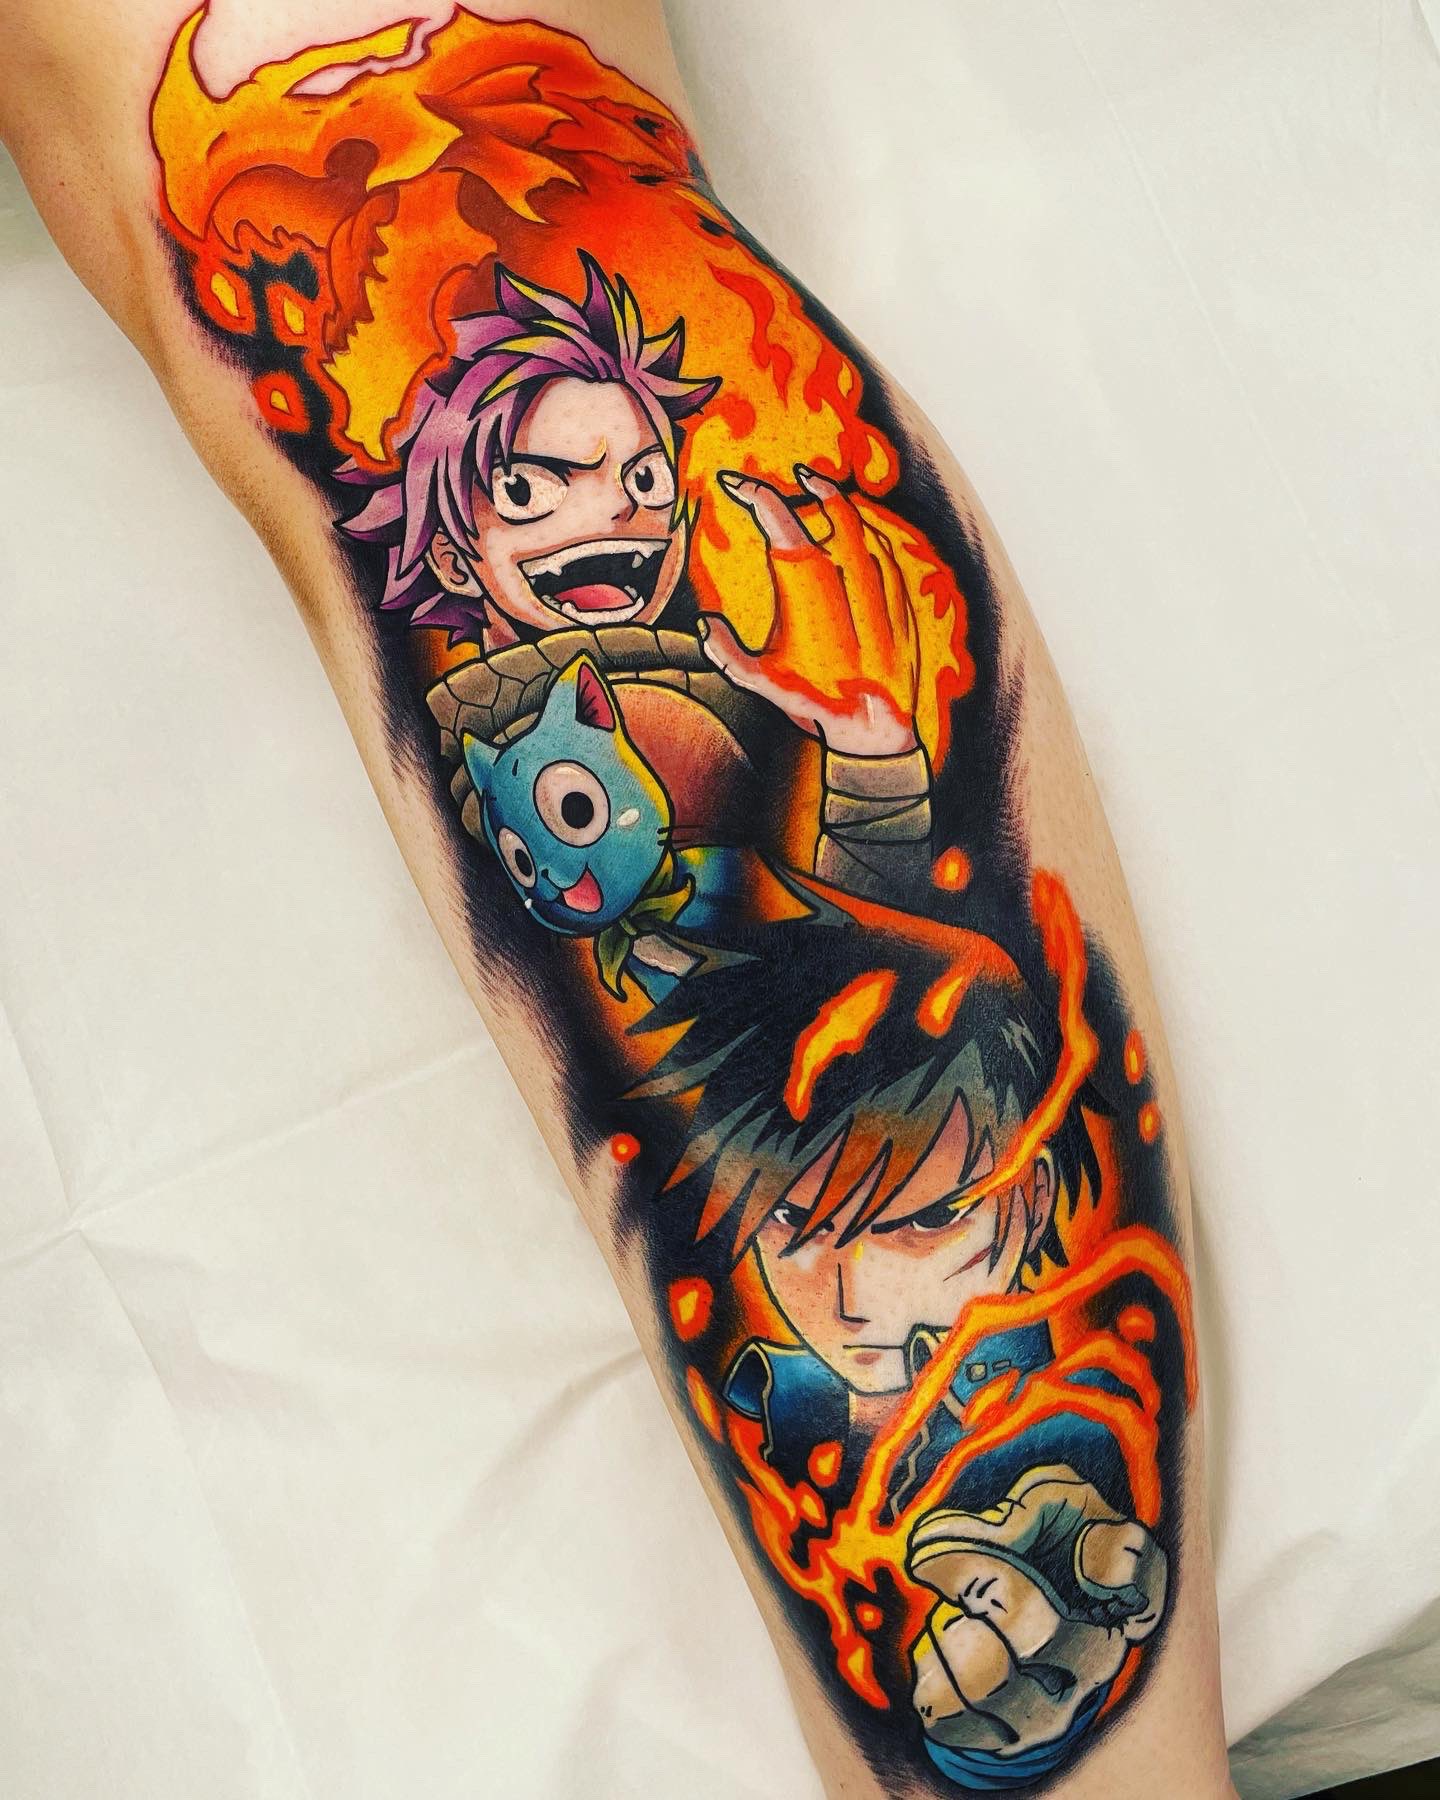 Fairy Tail 10 Amazing Tattoos To Inspire Your New Ink